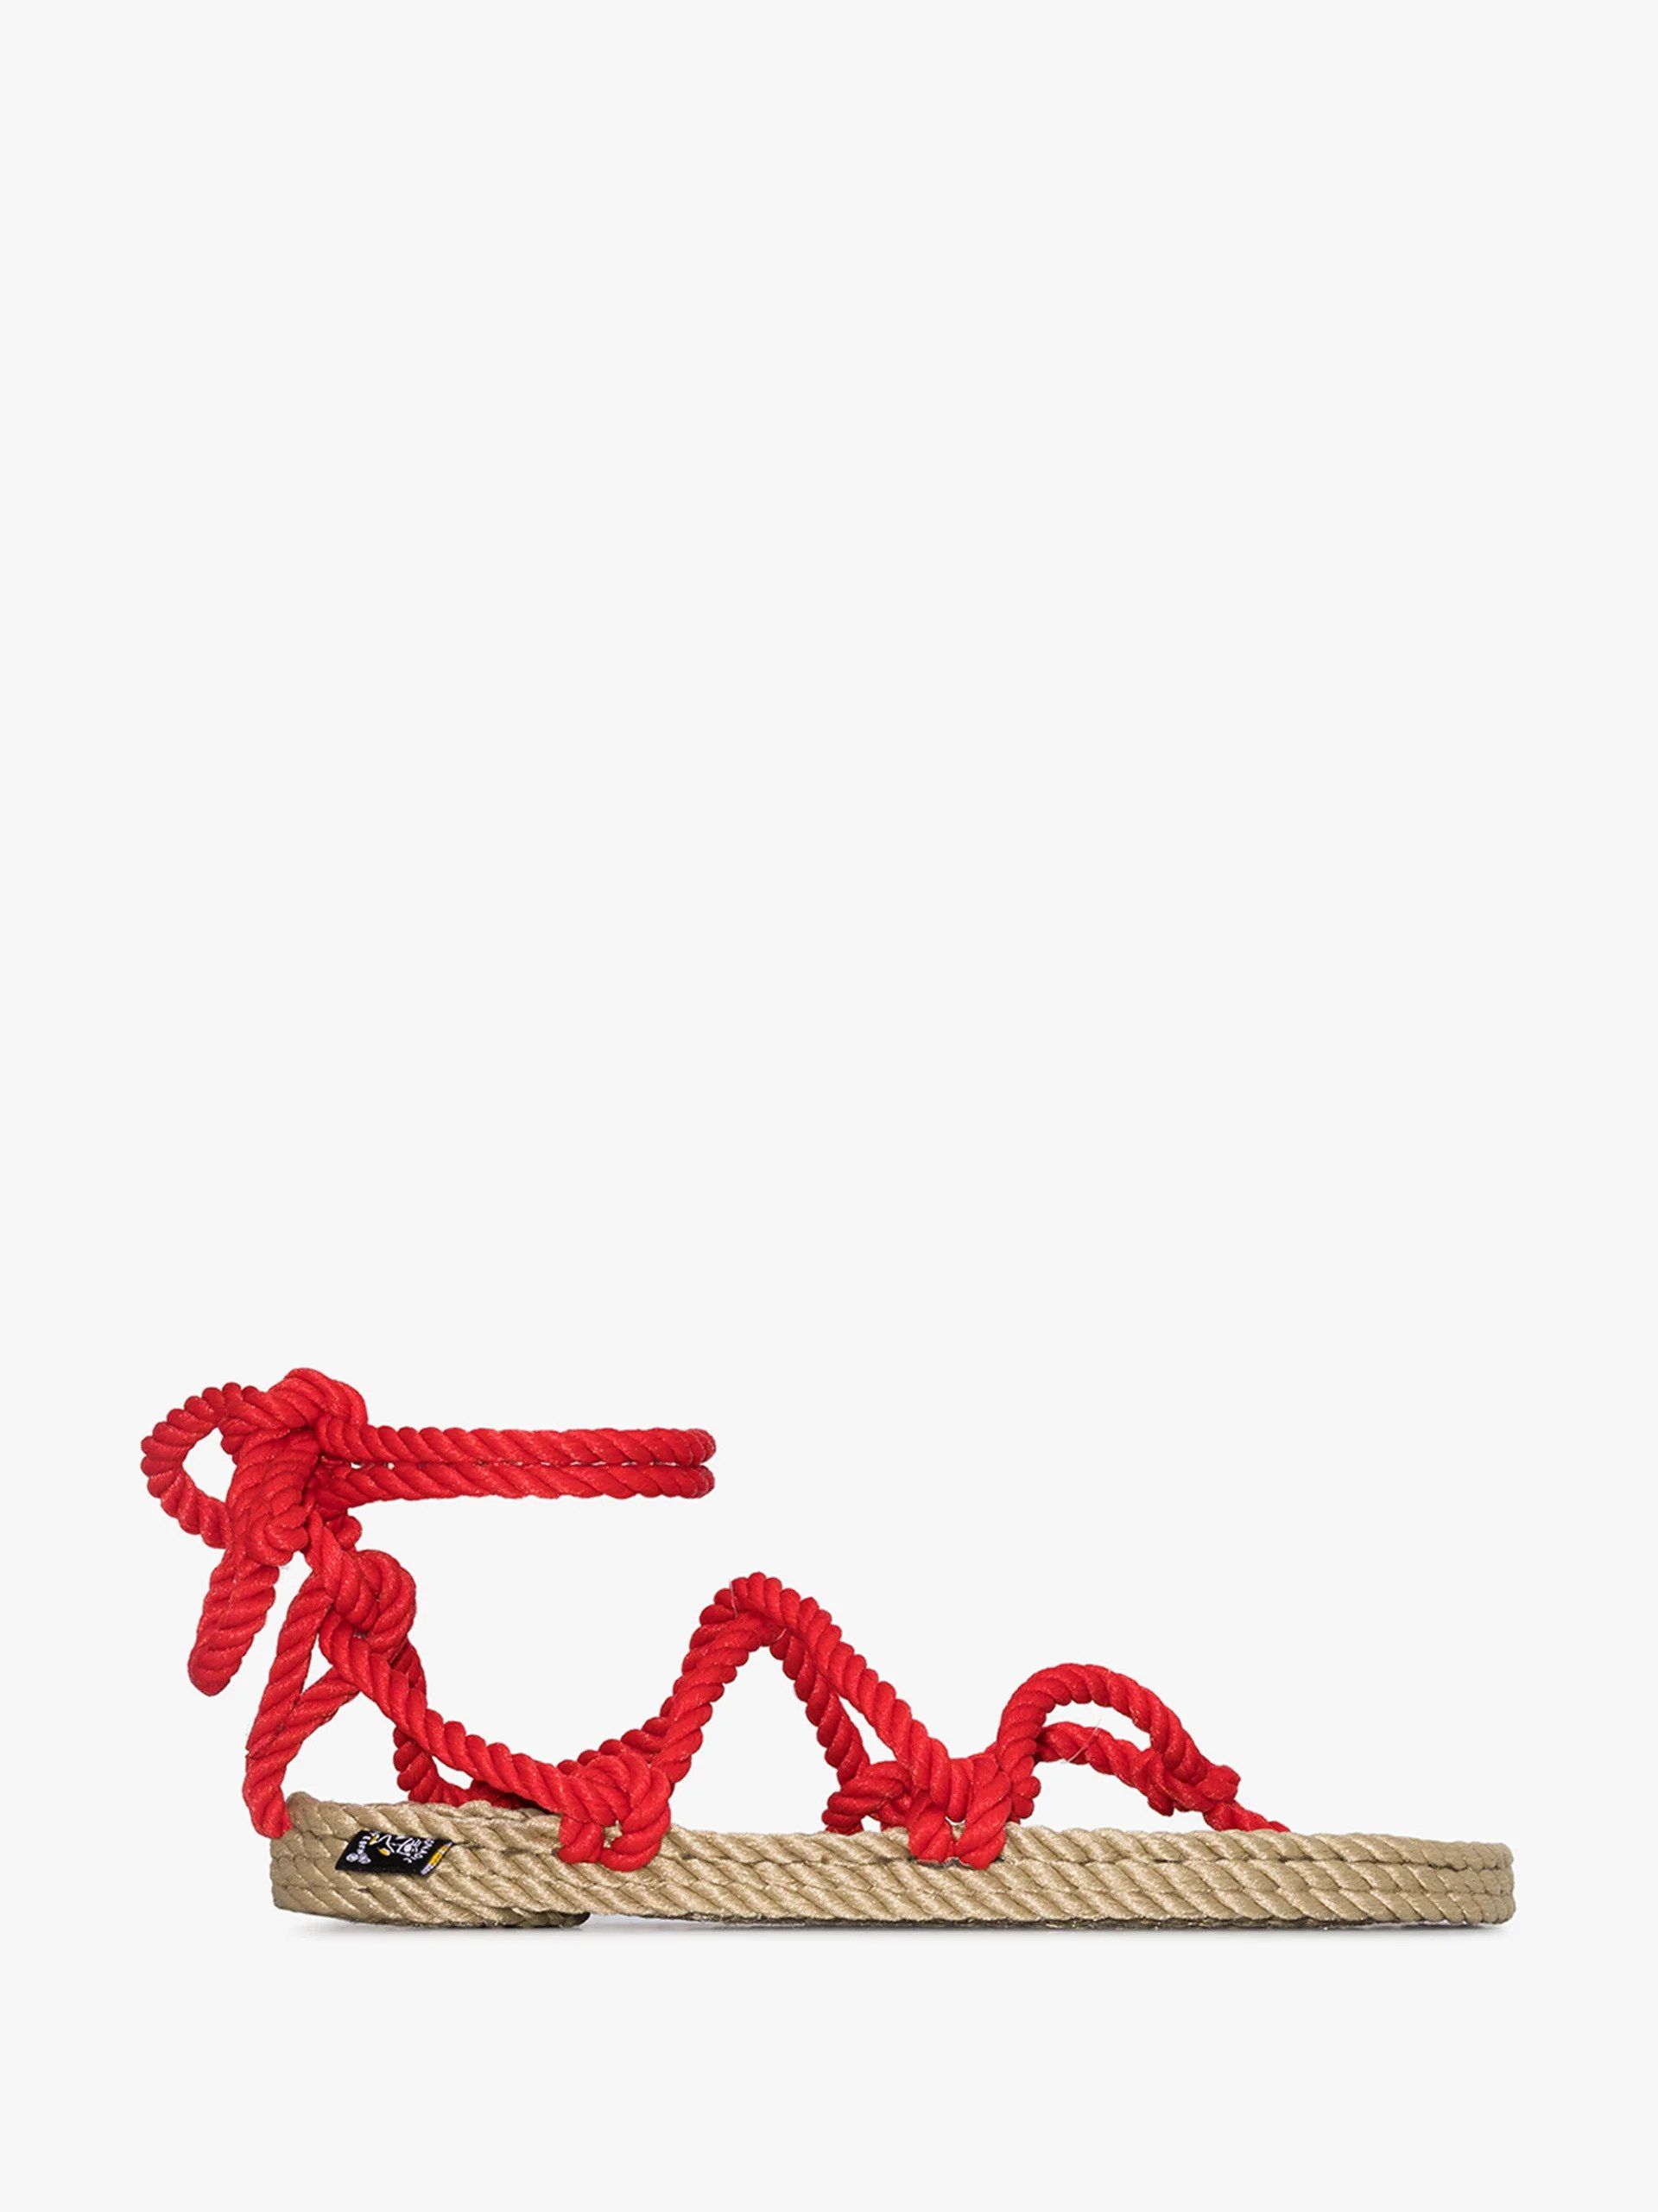 chanel rope sandals 2019